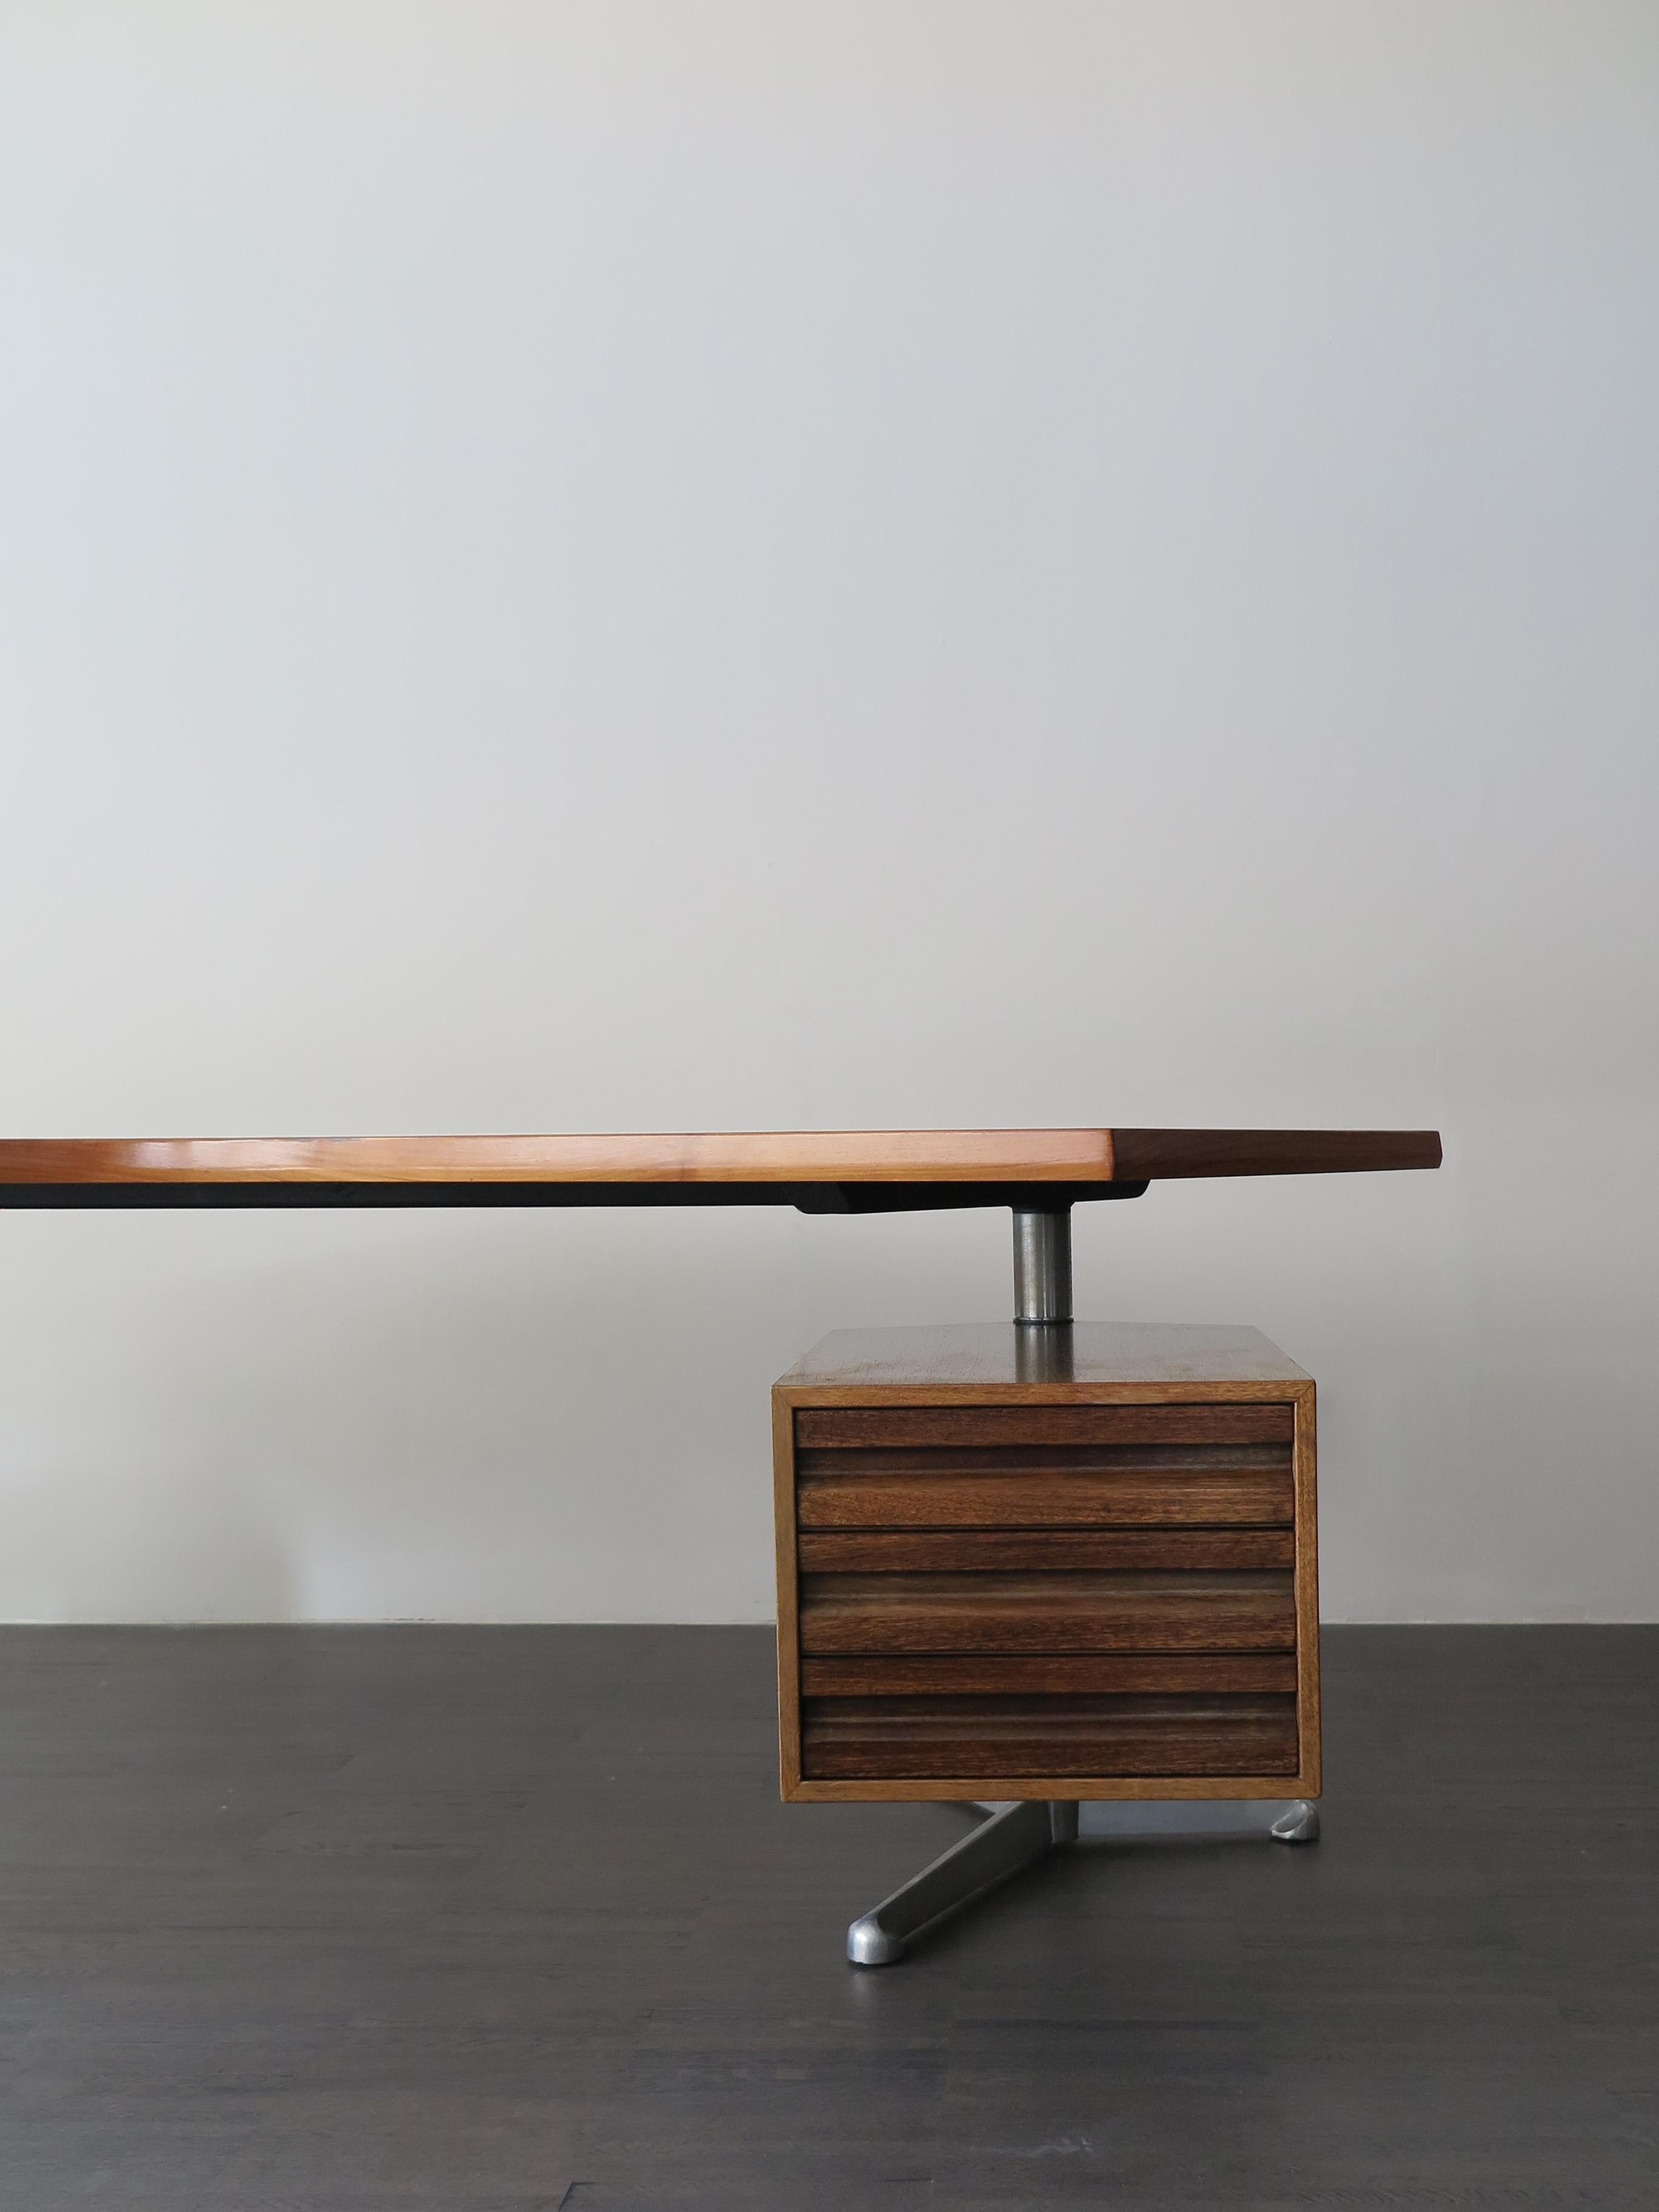 1950s walnut executive desk model T96 ‘Boomerang’ designed by italian Osvaldo Borsani and produced by Tecno Milano, the top has the characteristic shape of a boomerang, floating pedestal on right side and longer return on left, both rotate 360